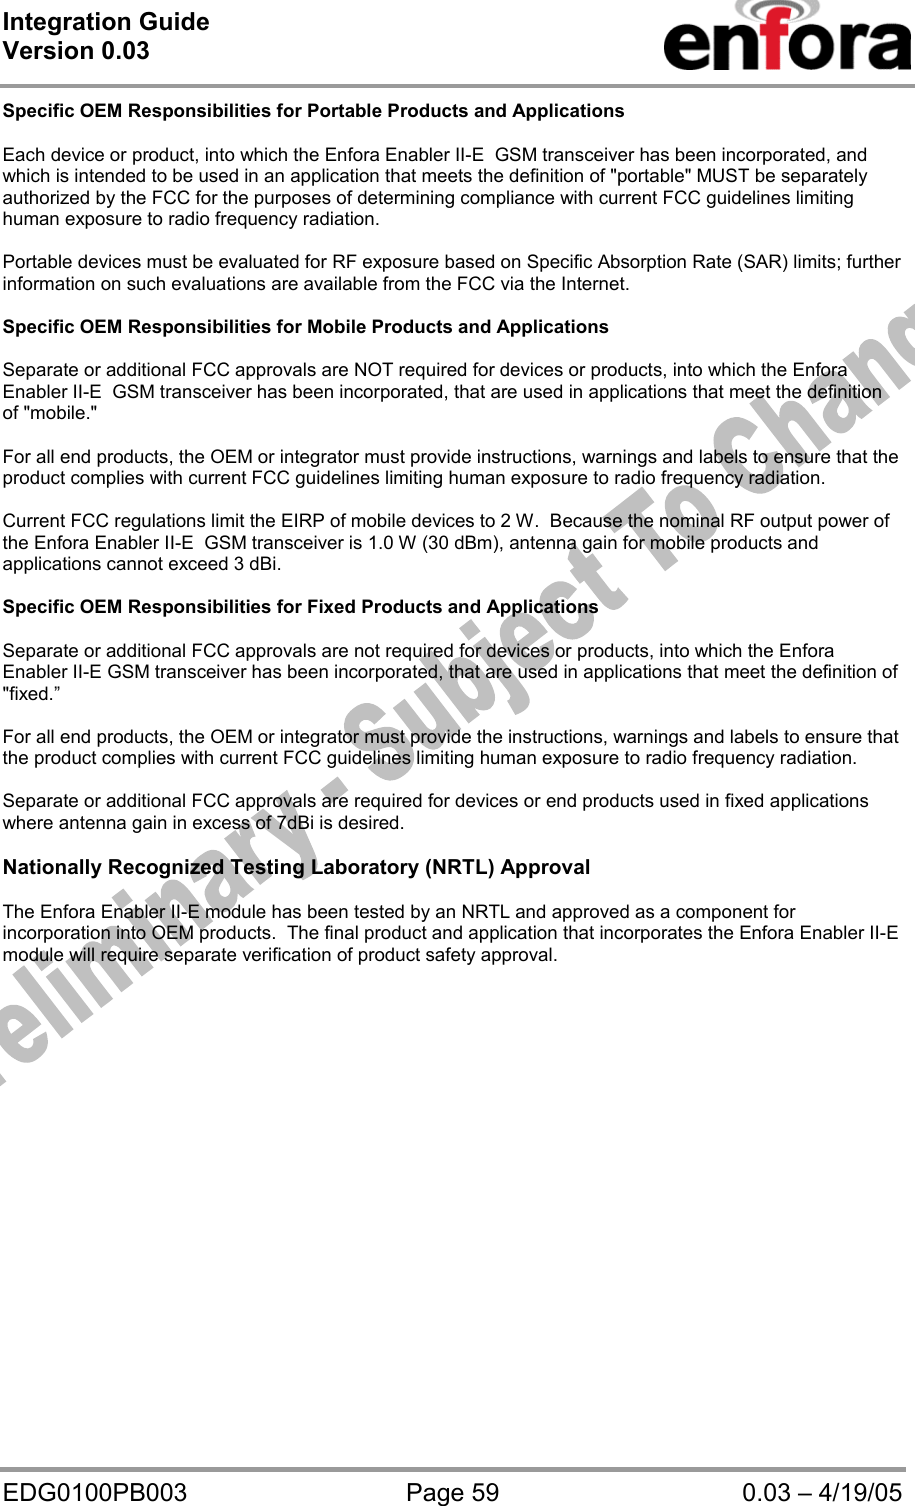 Integration Guide  Version 0.03   EDG0100PB003  Page 59  0.03 – 4/19/05 Specific OEM Responsibilities for Portable Products and Applications  Each device or product, into which the Enfora Enabler II-E  GSM transceiver has been incorporated, and which is intended to be used in an application that meets the definition of &quot;portable&quot; MUST be separately authorized by the FCC for the purposes of determining compliance with current FCC guidelines limiting human exposure to radio frequency radiation.  Portable devices must be evaluated for RF exposure based on Specific Absorption Rate (SAR) limits; further information on such evaluations are available from the FCC via the Internet.  Specific OEM Responsibilities for Mobile Products and Applications  Separate or additional FCC approvals are NOT required for devices or products, into which the Enfora Enabler II-E  GSM transceiver has been incorporated, that are used in applications that meet the definition of &quot;mobile.&quot;  For all end products, the OEM or integrator must provide instructions, warnings and labels to ensure that the product complies with current FCC guidelines limiting human exposure to radio frequency radiation.  Current FCC regulations limit the EIRP of mobile devices to 2 W.  Because the nominal RF output power of the Enfora Enabler II-E  GSM transceiver is 1.0 W (30 dBm), antenna gain for mobile products and applications cannot exceed 3 dBi.  Specific OEM Responsibilities for Fixed Products and Applications  Separate or additional FCC approvals are not required for devices or products, into which the Enfora Enabler II-E GSM transceiver has been incorporated, that are used in applications that meet the definition of &quot;fixed.”  For all end products, the OEM or integrator must provide the instructions, warnings and labels to ensure that the product complies with current FCC guidelines limiting human exposure to radio frequency radiation.  Separate or additional FCC approvals are required for devices or end products used in fixed applications where antenna gain in excess of 7dBi is desired.  Nationally Recognized Testing Laboratory (NRTL) Approval  The Enfora Enabler II-E module has been tested by an NRTL and approved as a component for incorporation into OEM products.  The final product and application that incorporates the Enfora Enabler II-E module will require separate verification of product safety approval. 